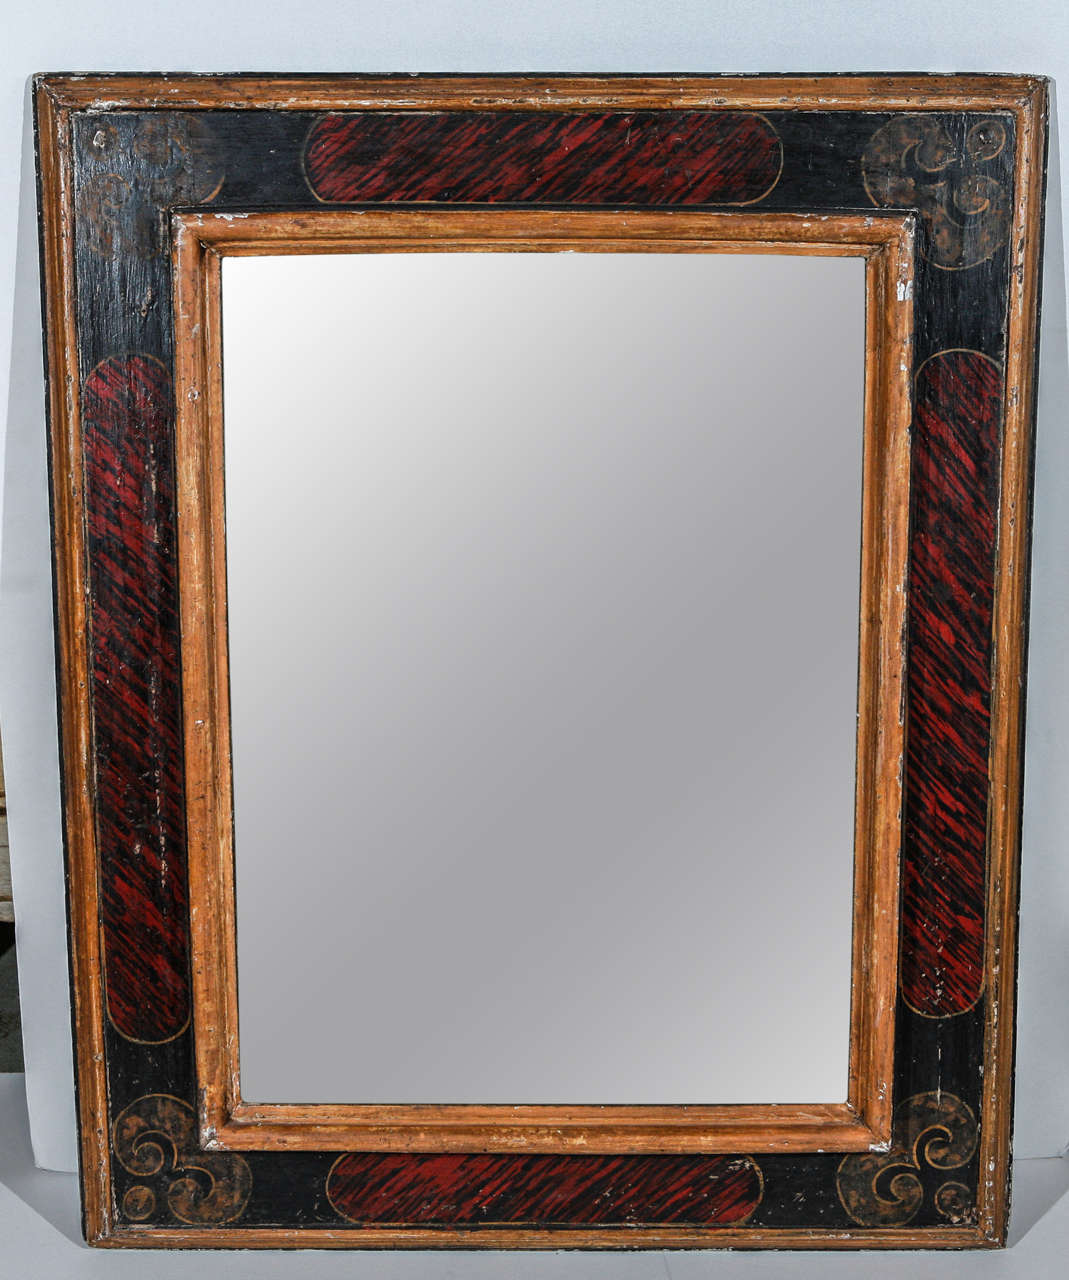 Hand-painted Tuscan frames in old wood with mercury glass mirrors.